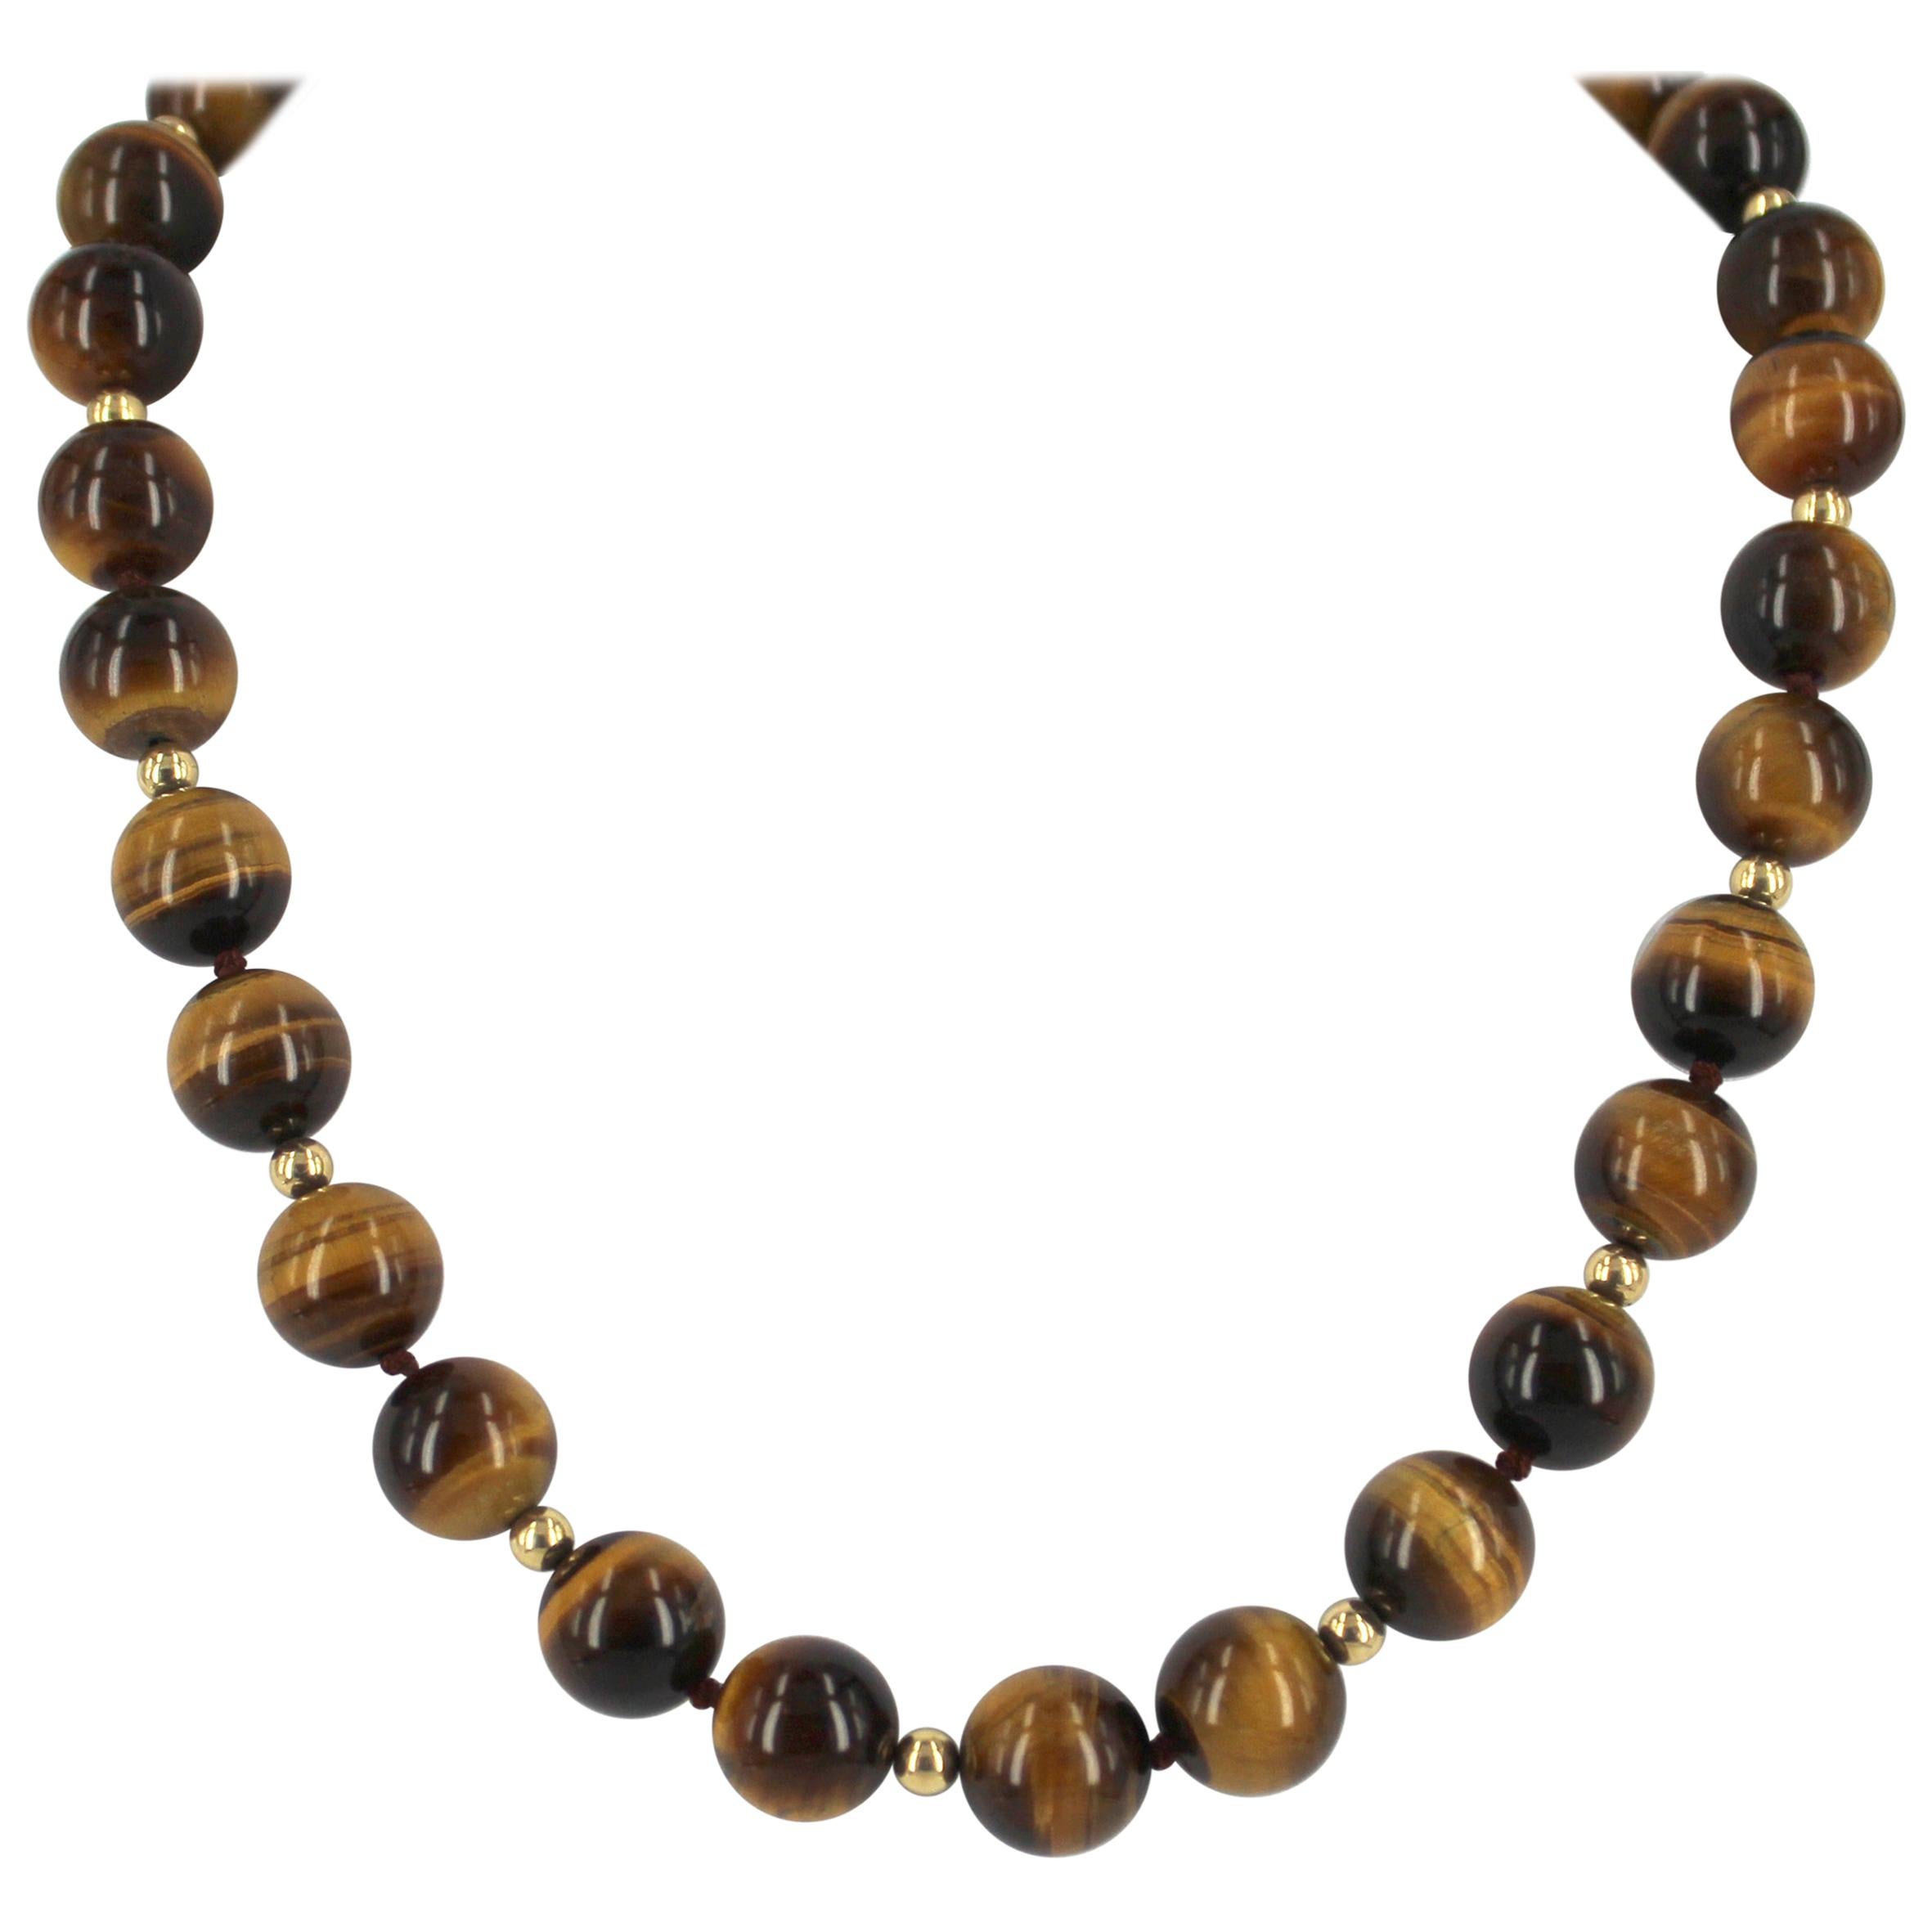 Natural Tigereye Round Beads Hand-knotted Long Necklace 60" FREE SHIPPING 